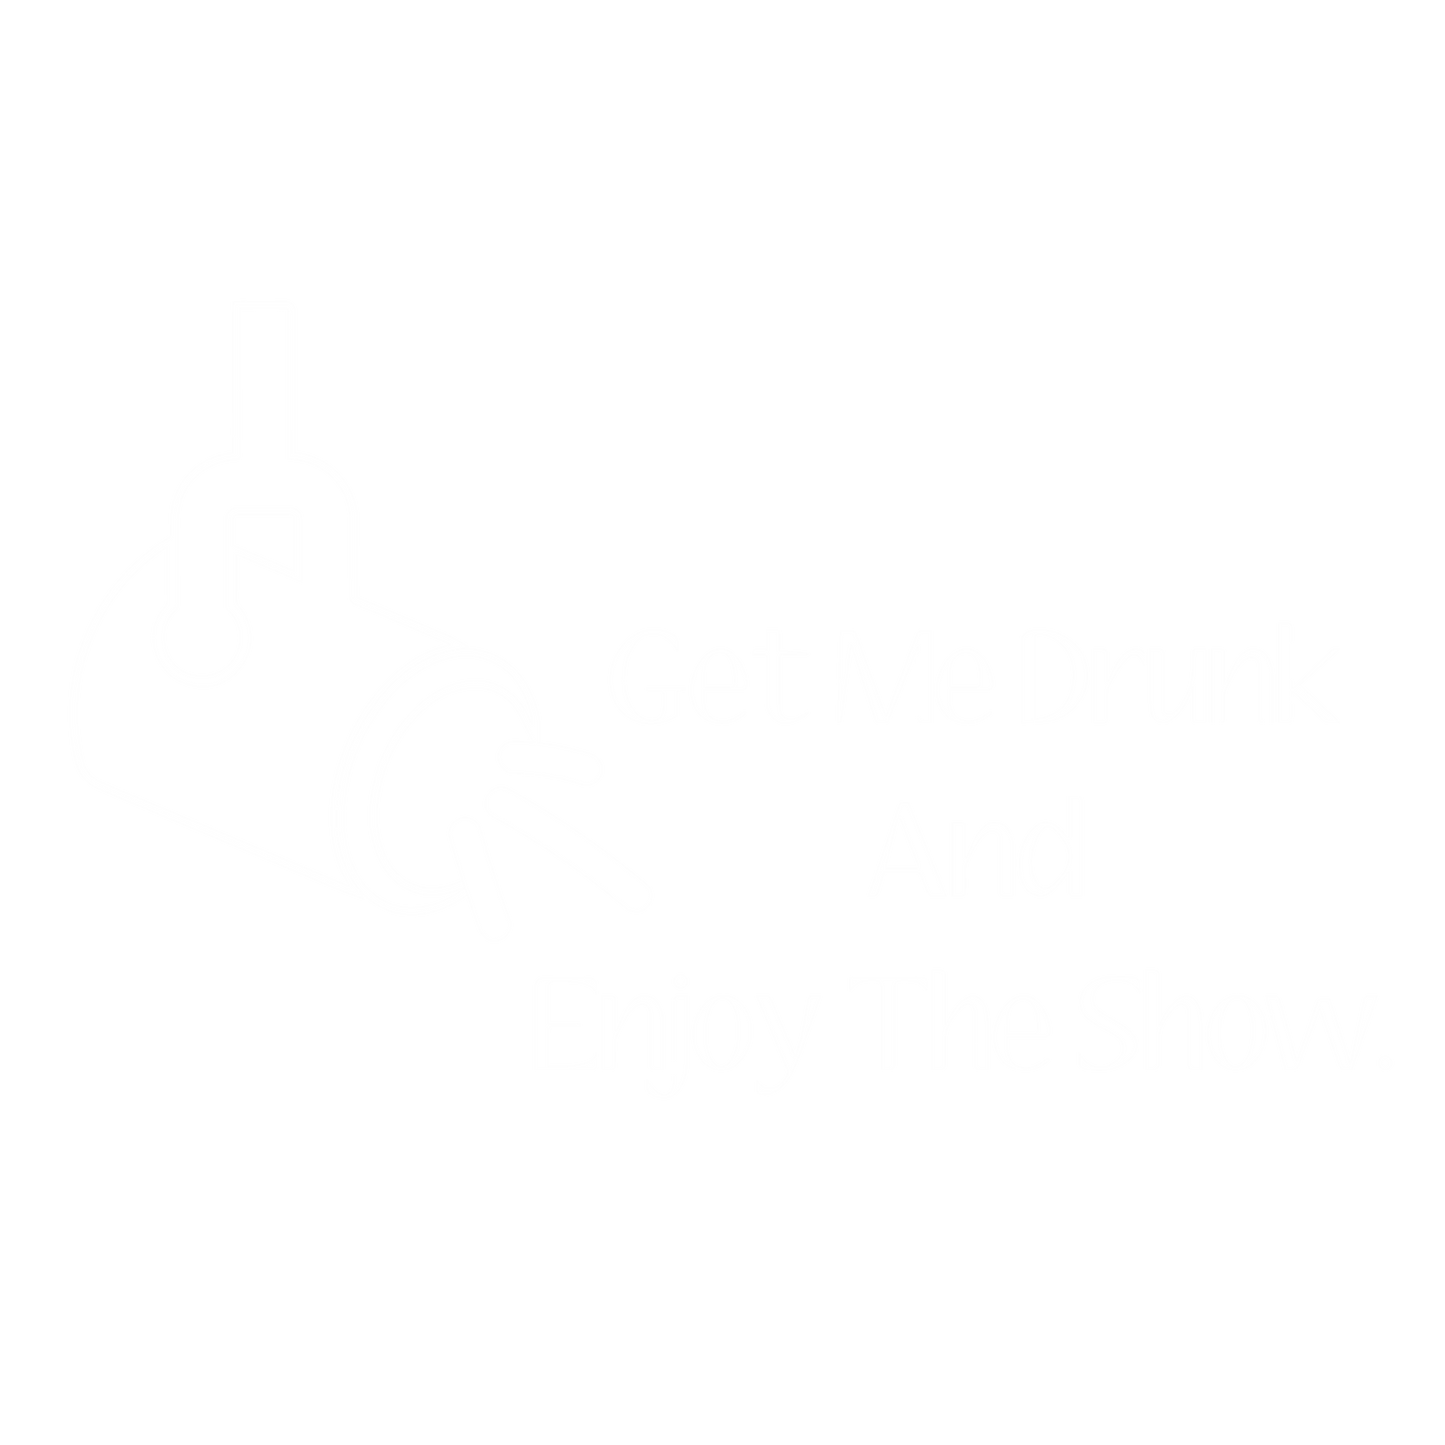 Get Me Drunk And Enjoy The Show. New